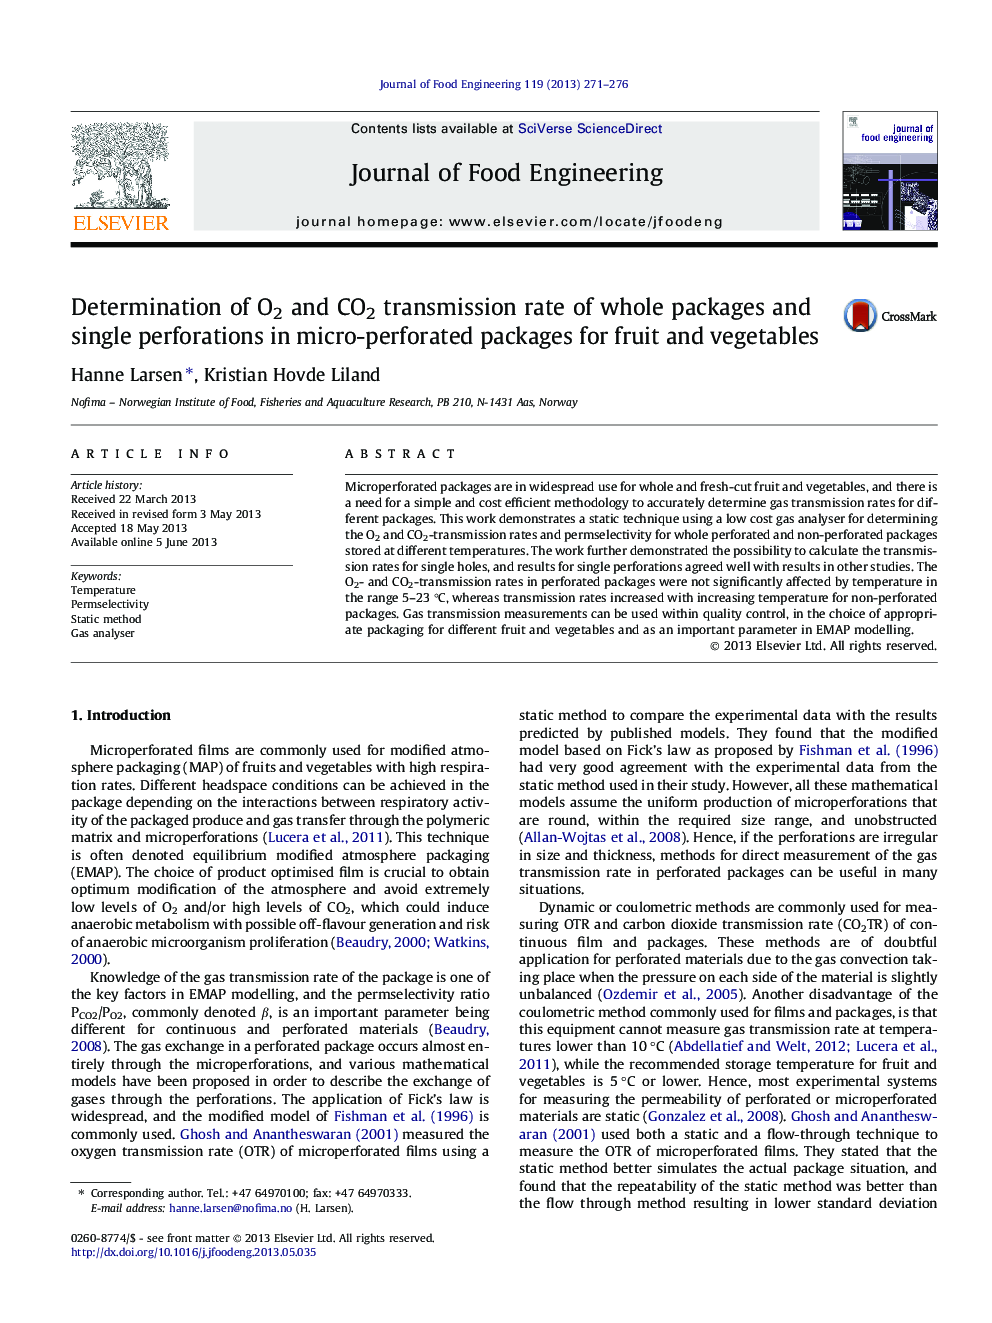 Determination of O2 and CO2 transmission rate of whole packages and single perforations in micro-perforated packages for fruit and vegetables